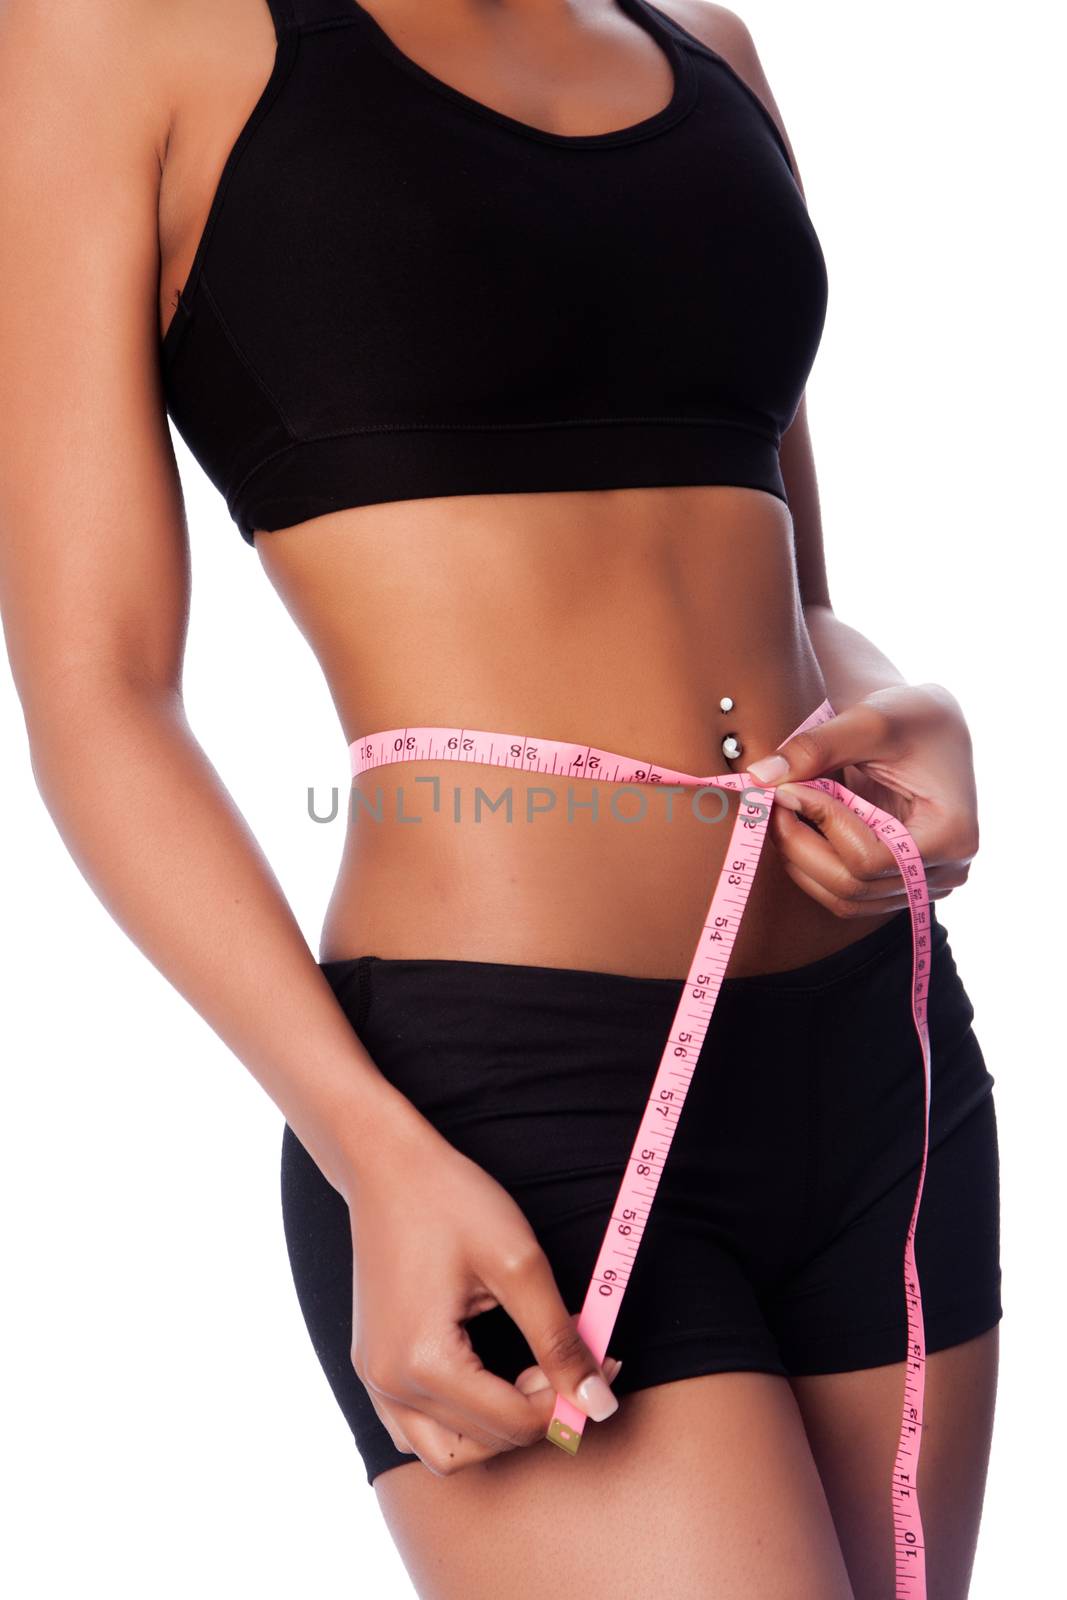 Healthy fit woman measuring waste, weightloss concept.